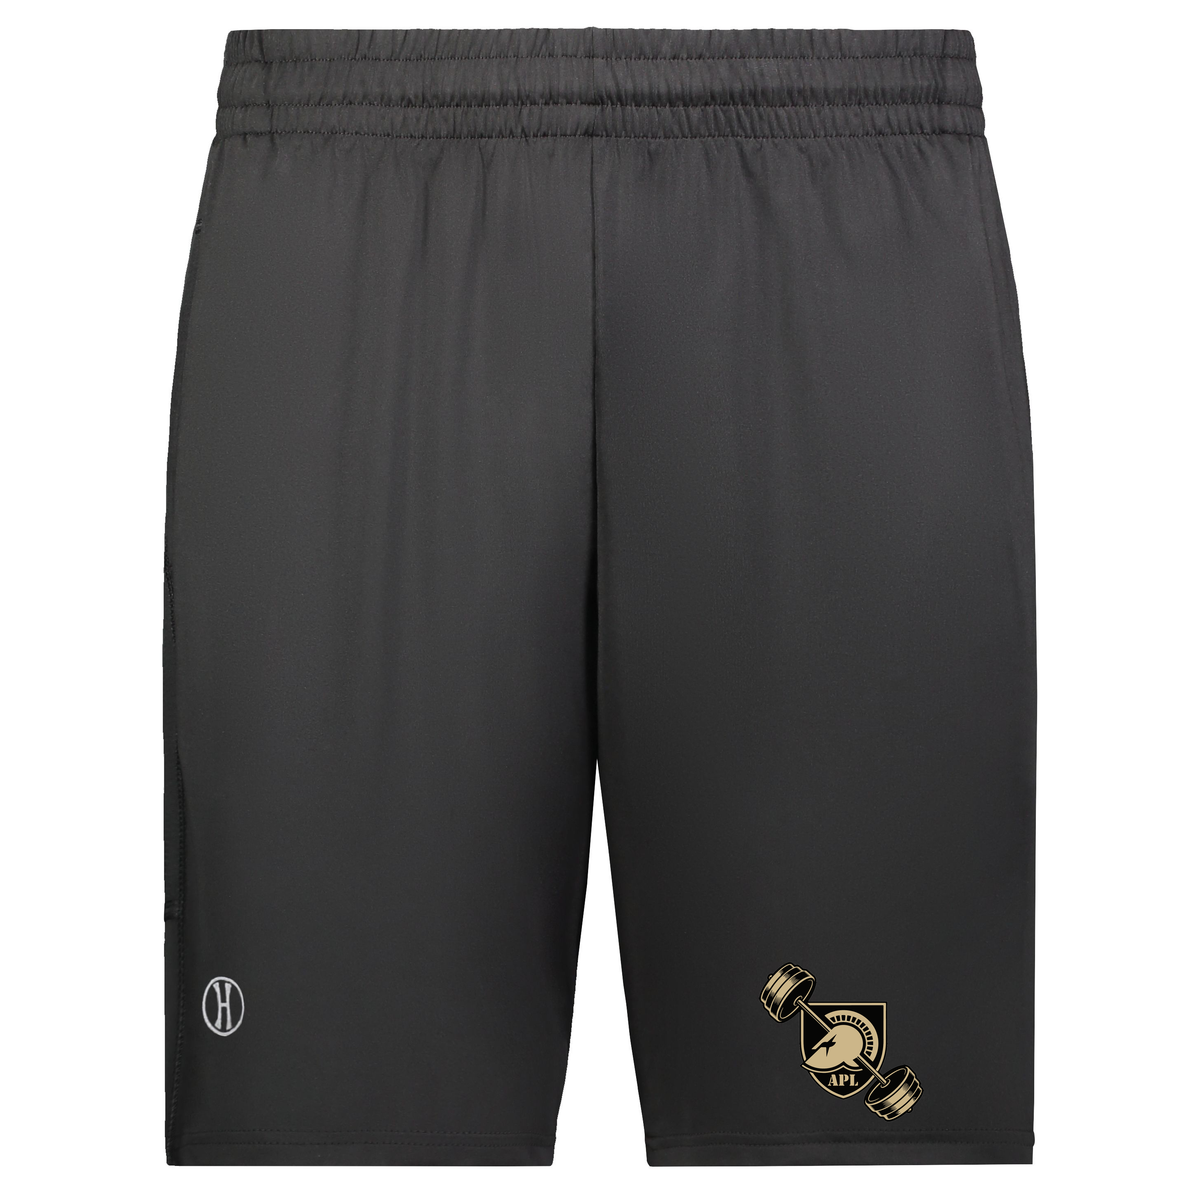 Army Powerlifting CoolCore Shorts